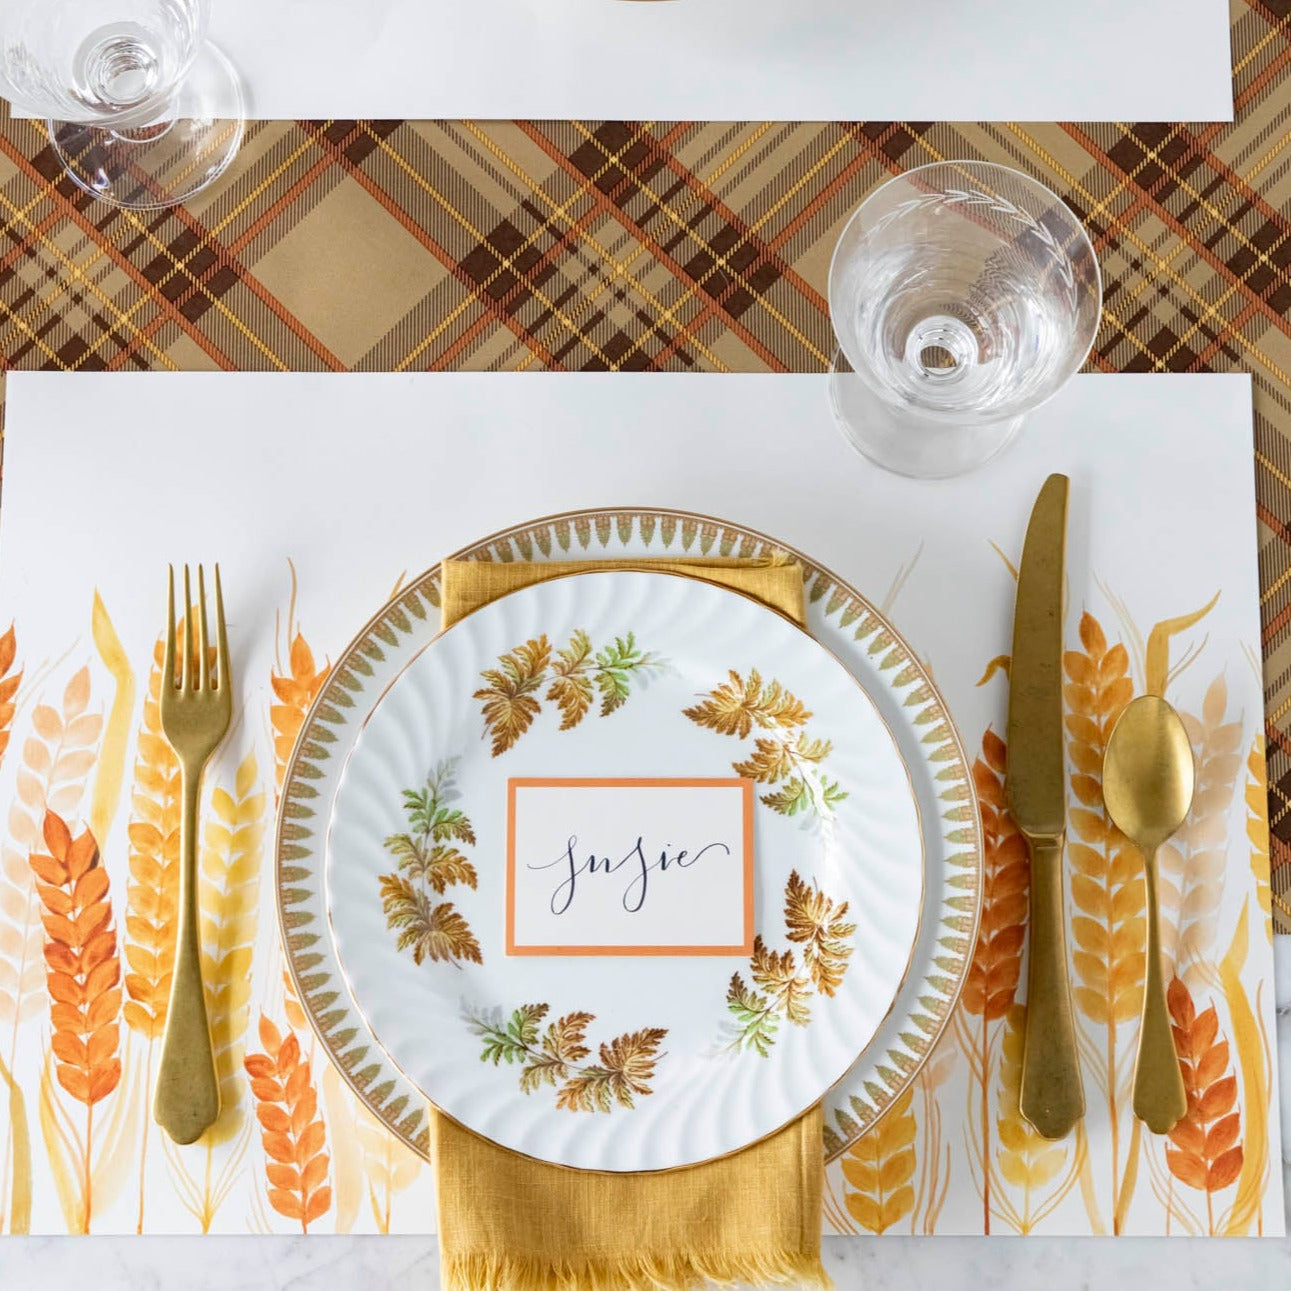 The Golden Wheat Placemat under a fall themed place setting, from above.